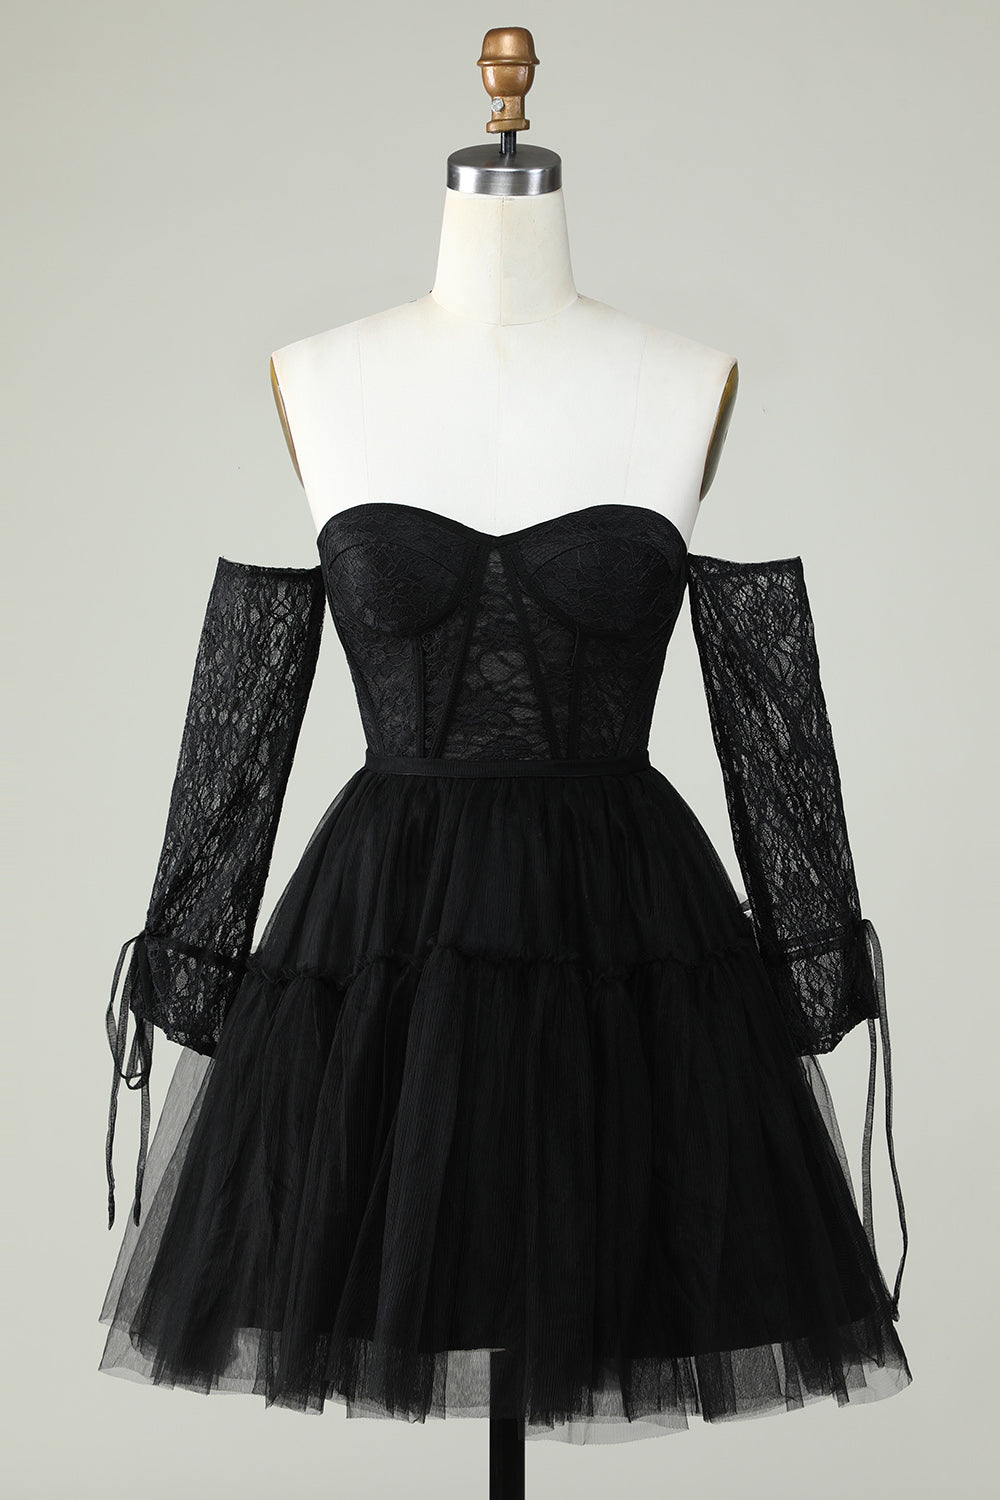 A Line Off the Shoulder Black Corset Cocktail Dress with Long Sleeves